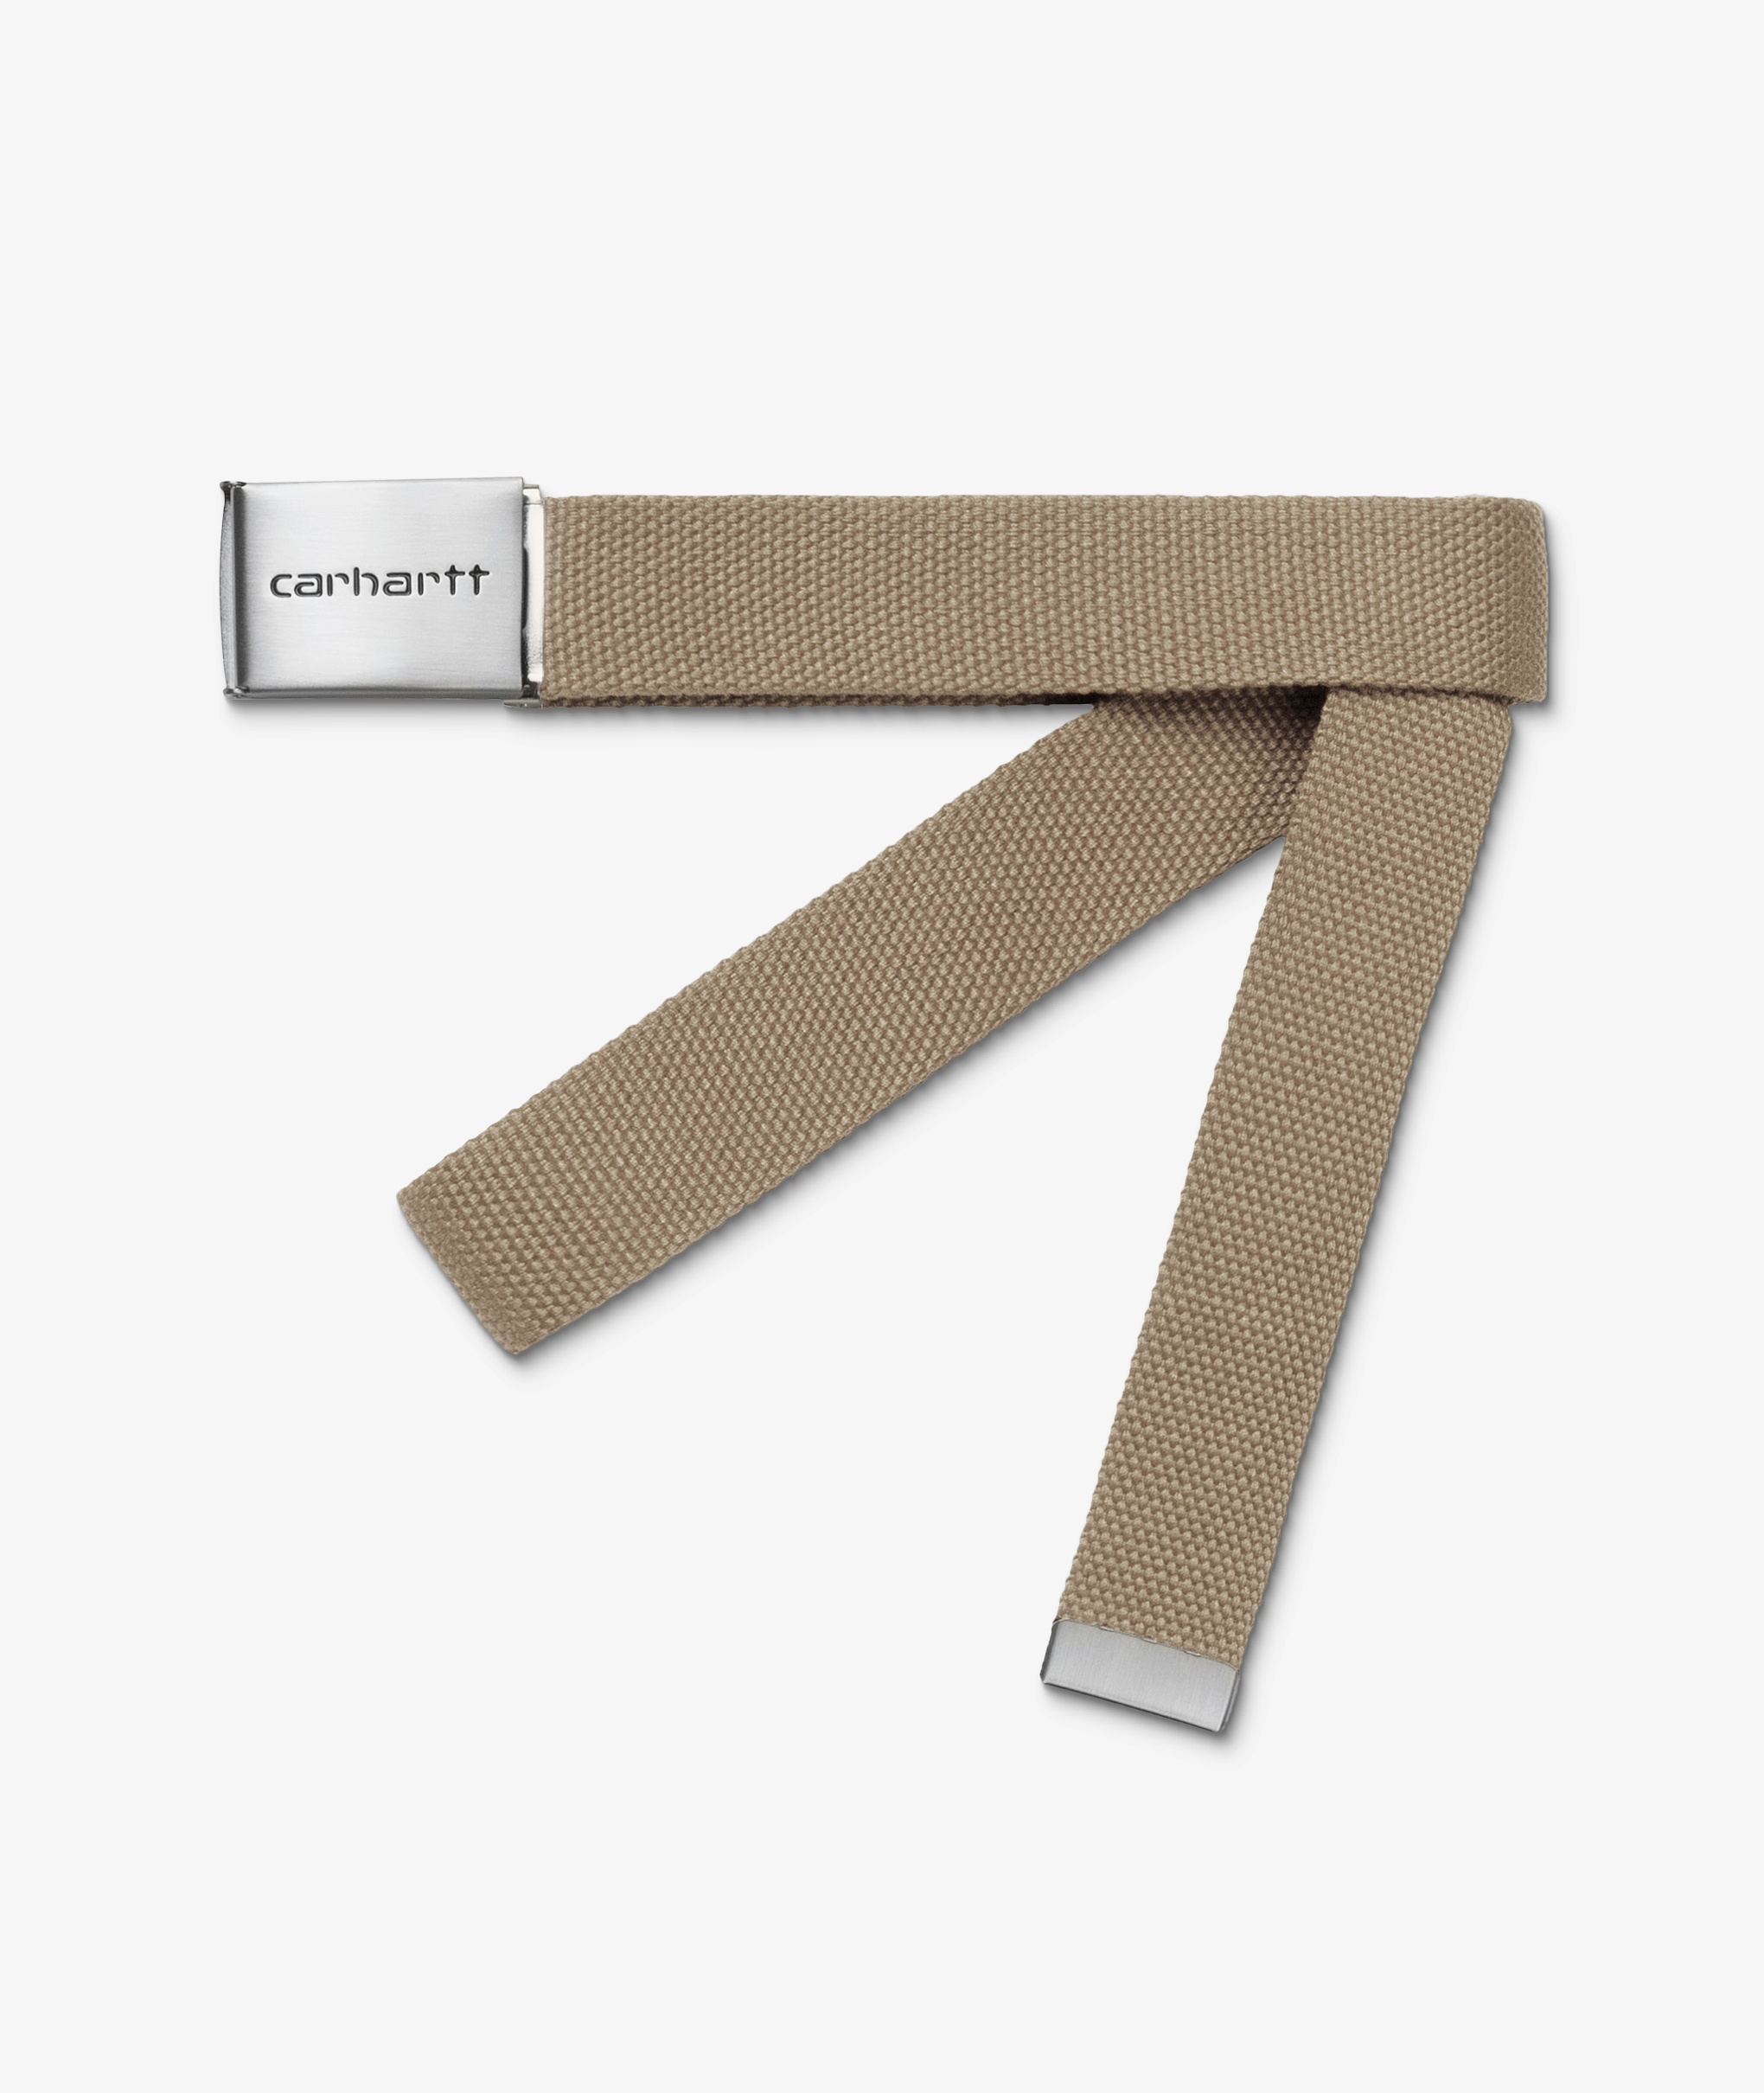 Norse Store | Shipping Worldwide - Carhartt WIP Clip Belt Chrome - Leather